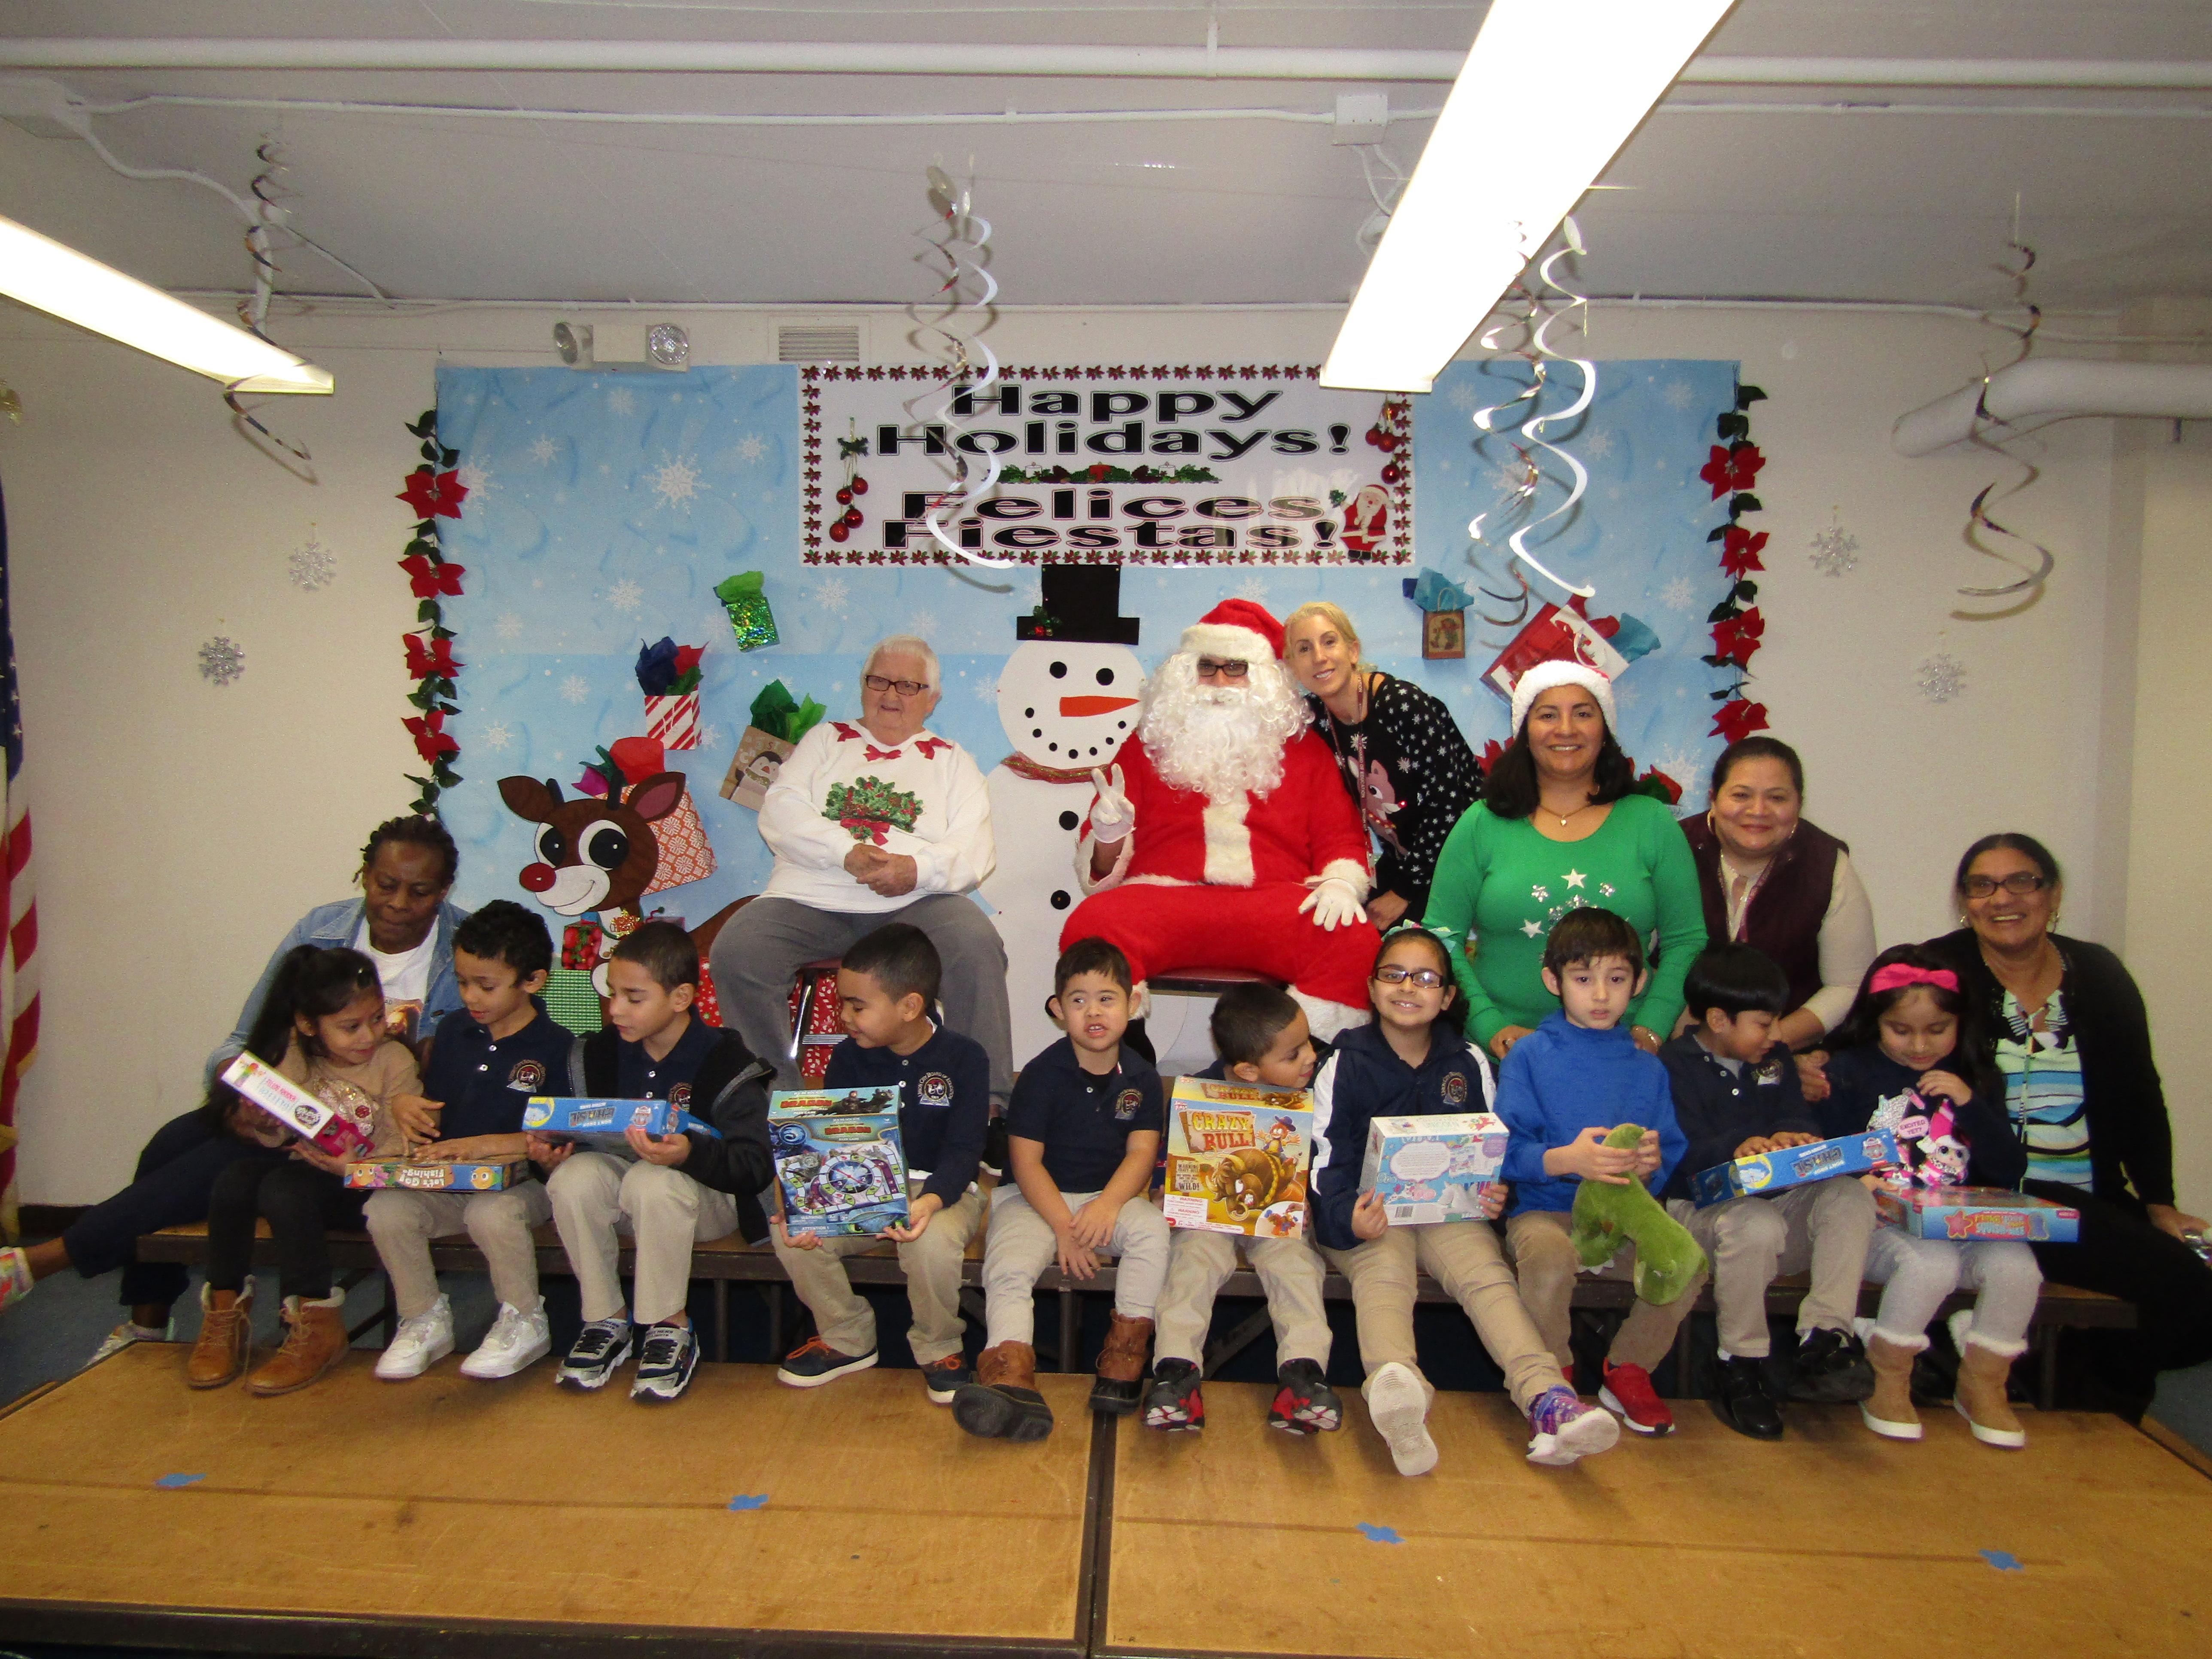 Ms. Marone's class with Santa holding onto their gifts